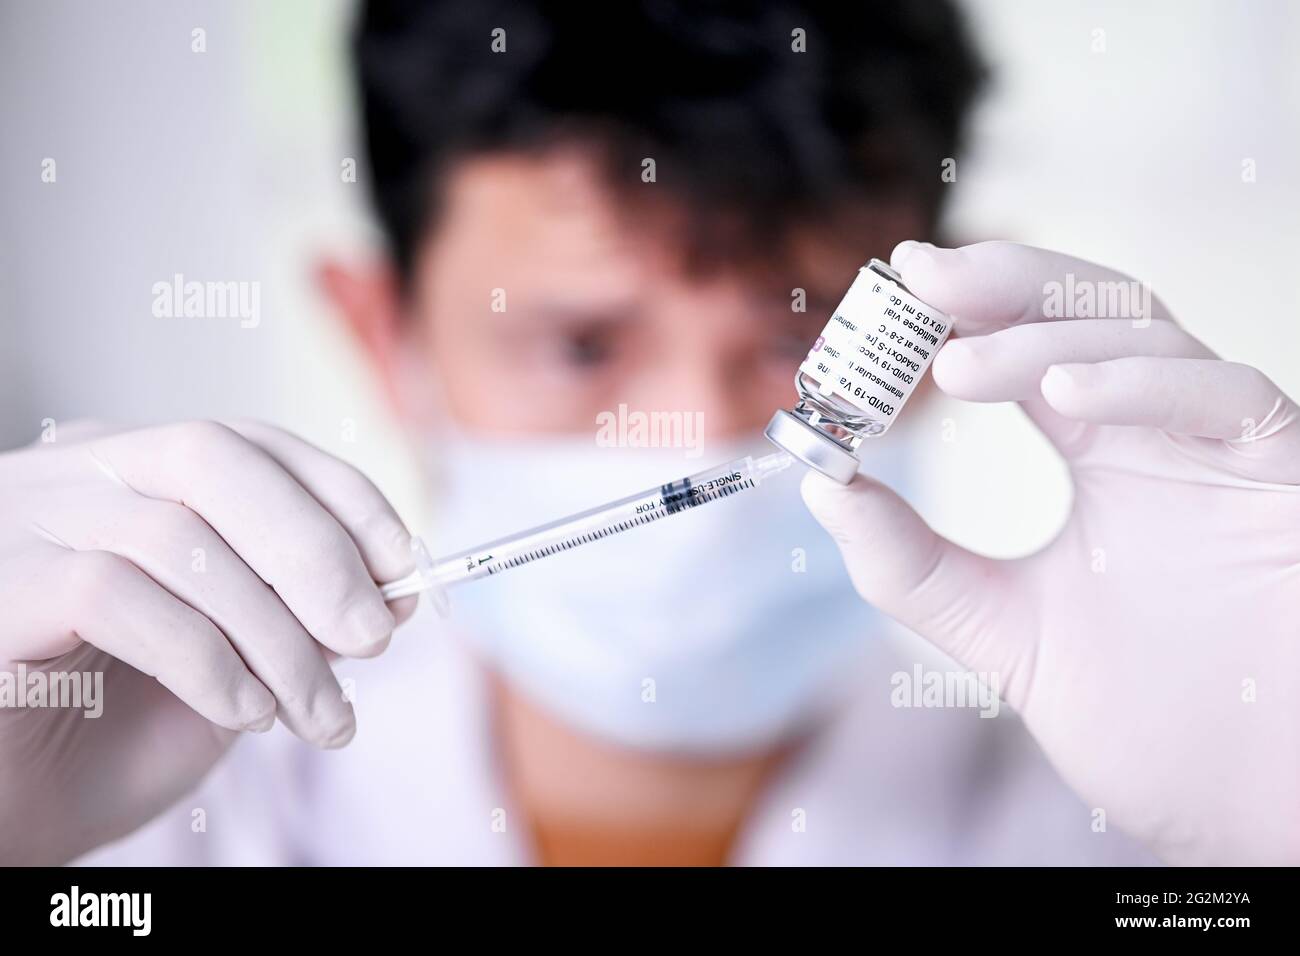 Doctor's hands in surgical gloves preparing COVID-19 vaccine for patient, ,COVID-19 vaccines can help reduce the transmissionor stop pandemic of the Stock Photo